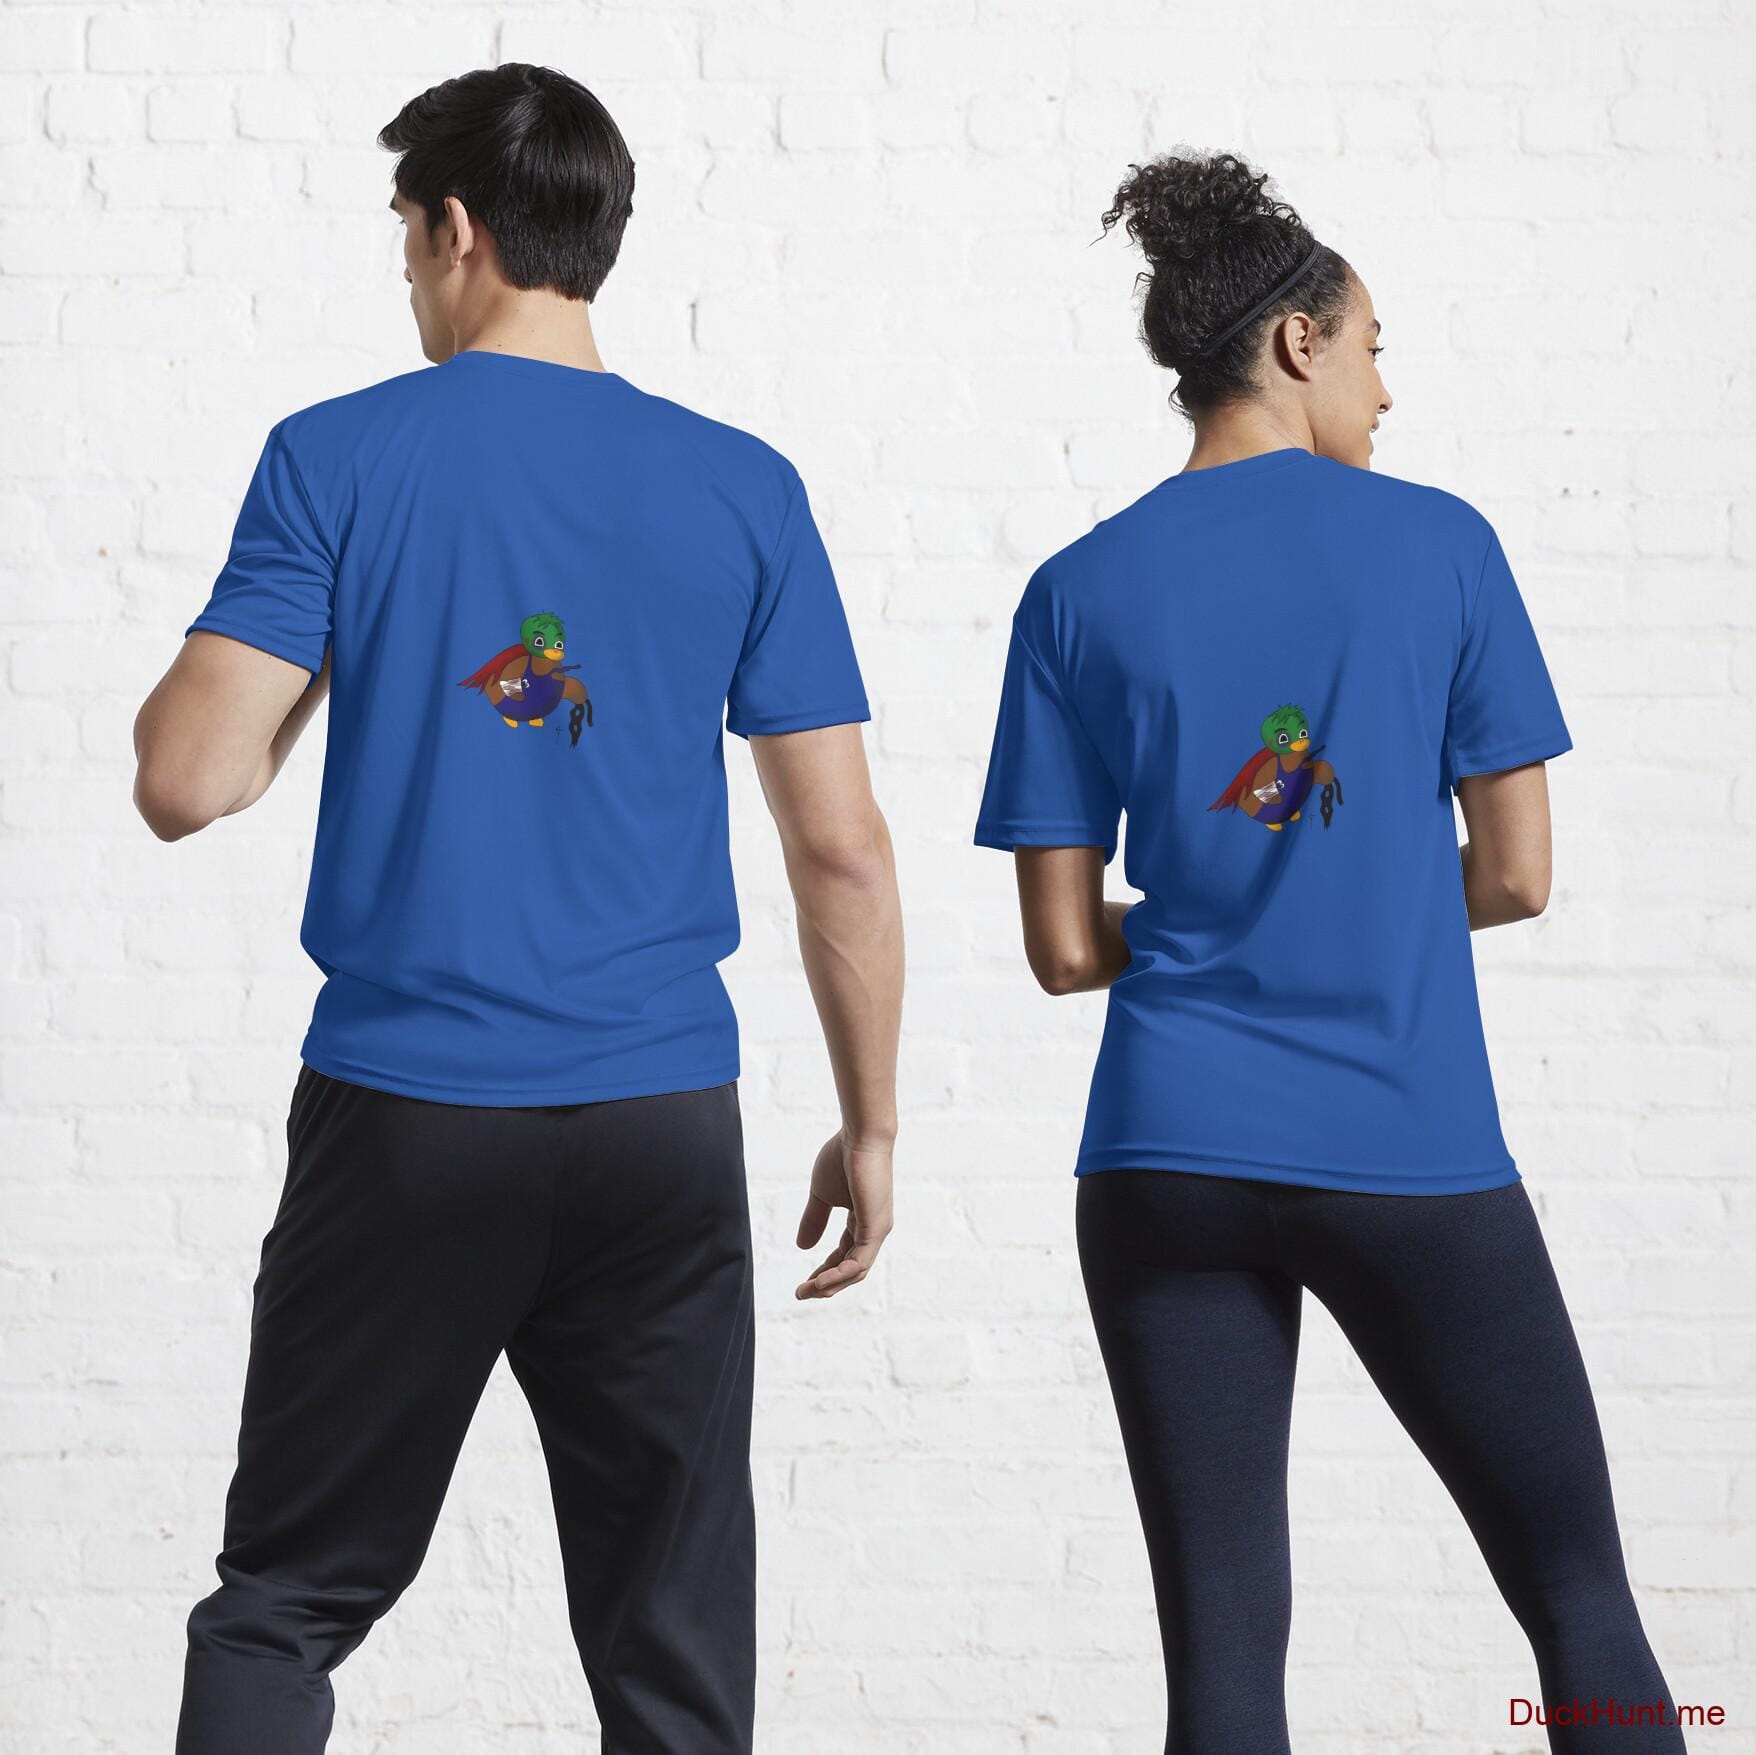 Dead DuckHunt Boss (smokeless) Royal Blue Active T-Shirt (Back printed)